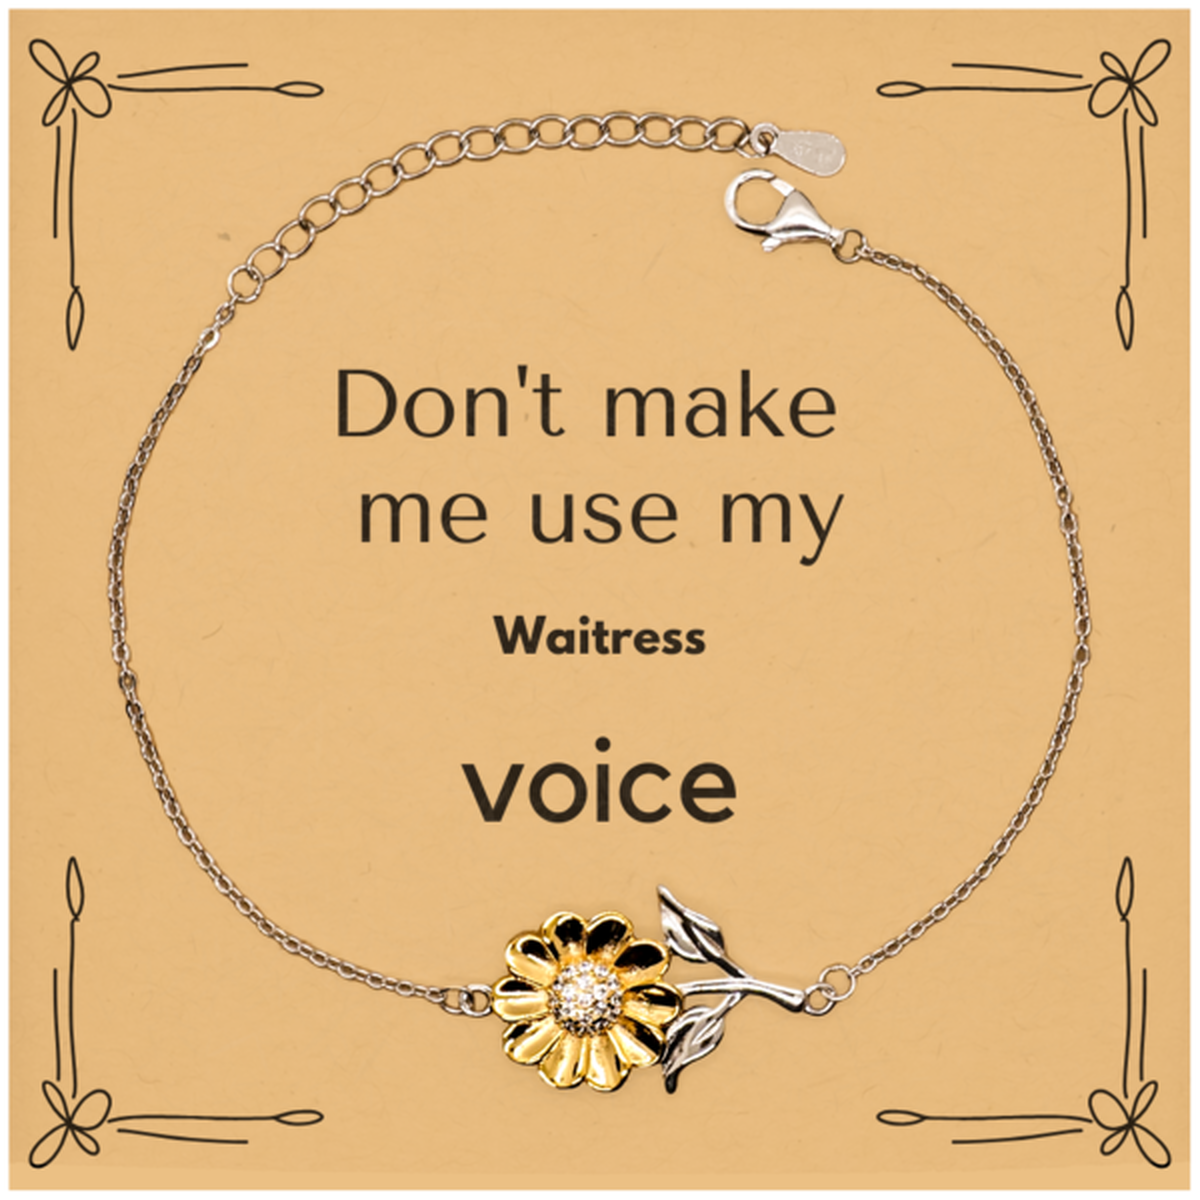 Don't make me use my Waitress voice, Sarcasm Waitress Card Gifts, Christmas Waitress Sunflower Bracelet Birthday Unique Gifts For Waitress Coworkers, Men, Women, Colleague, Friends